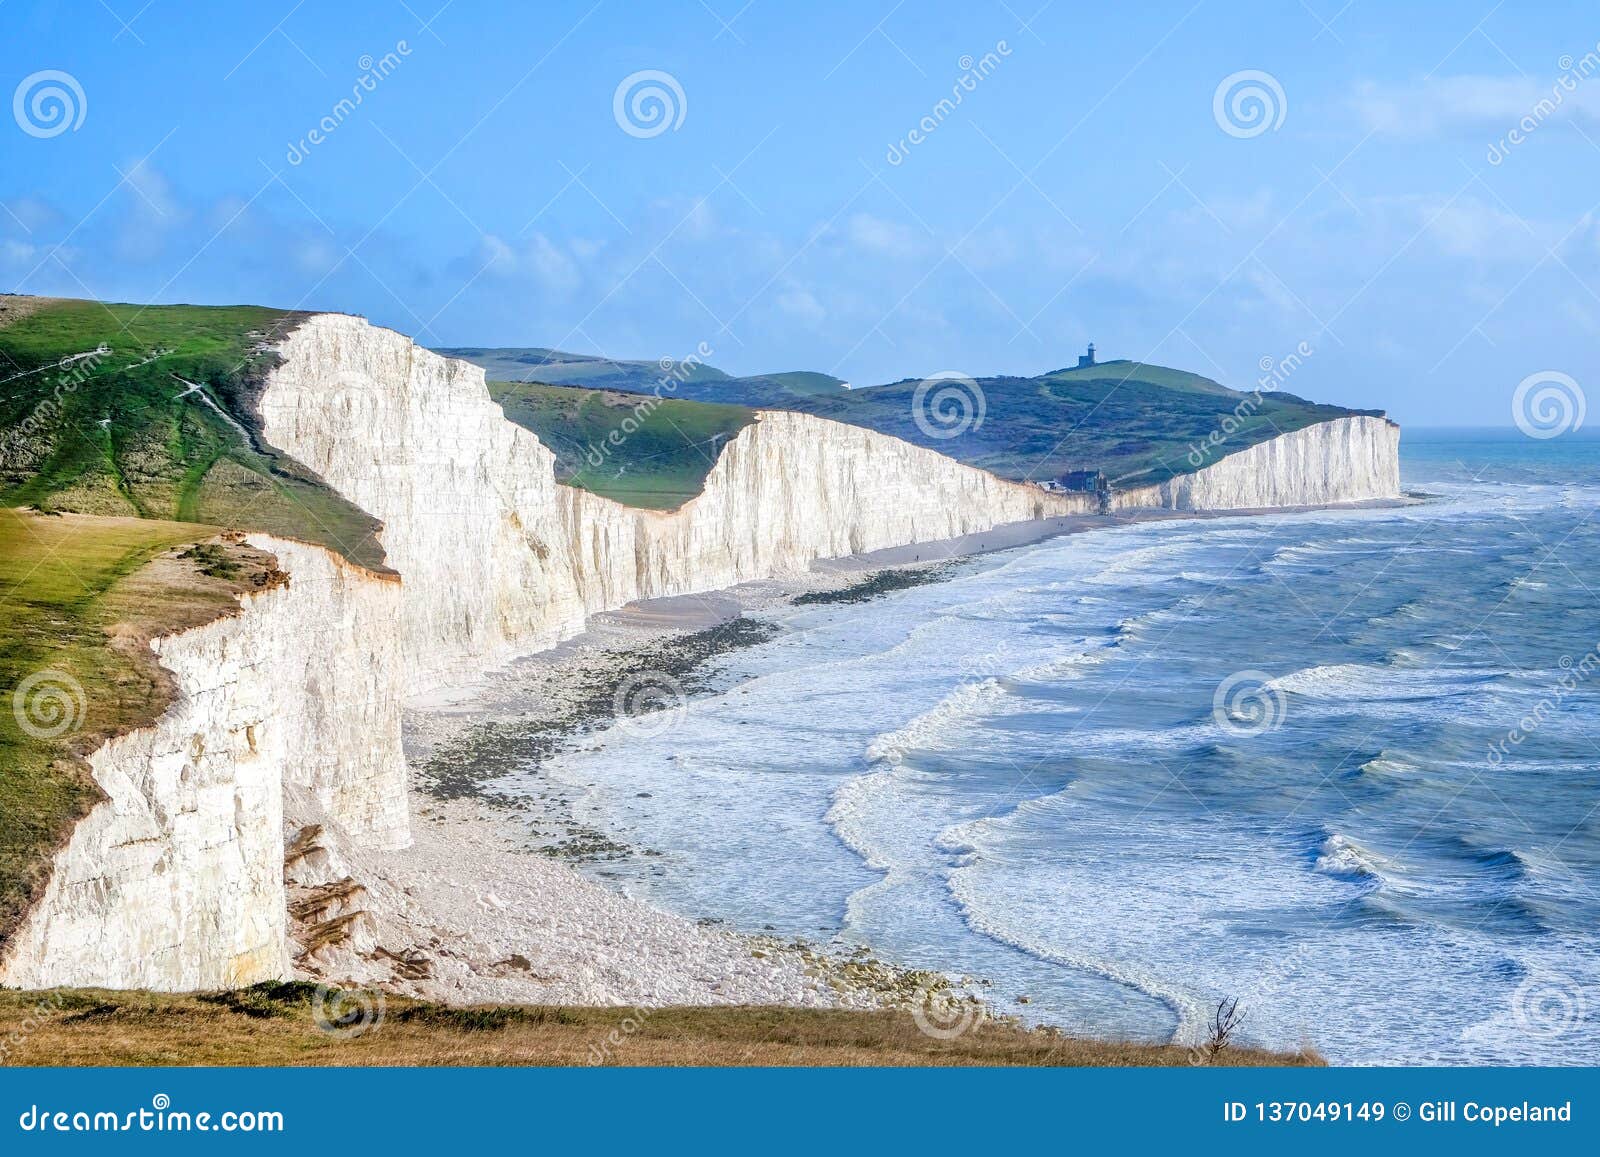 Seven Sisters Chalk Cliffs, East Sussex, UK Stock Image - Image of edge ...